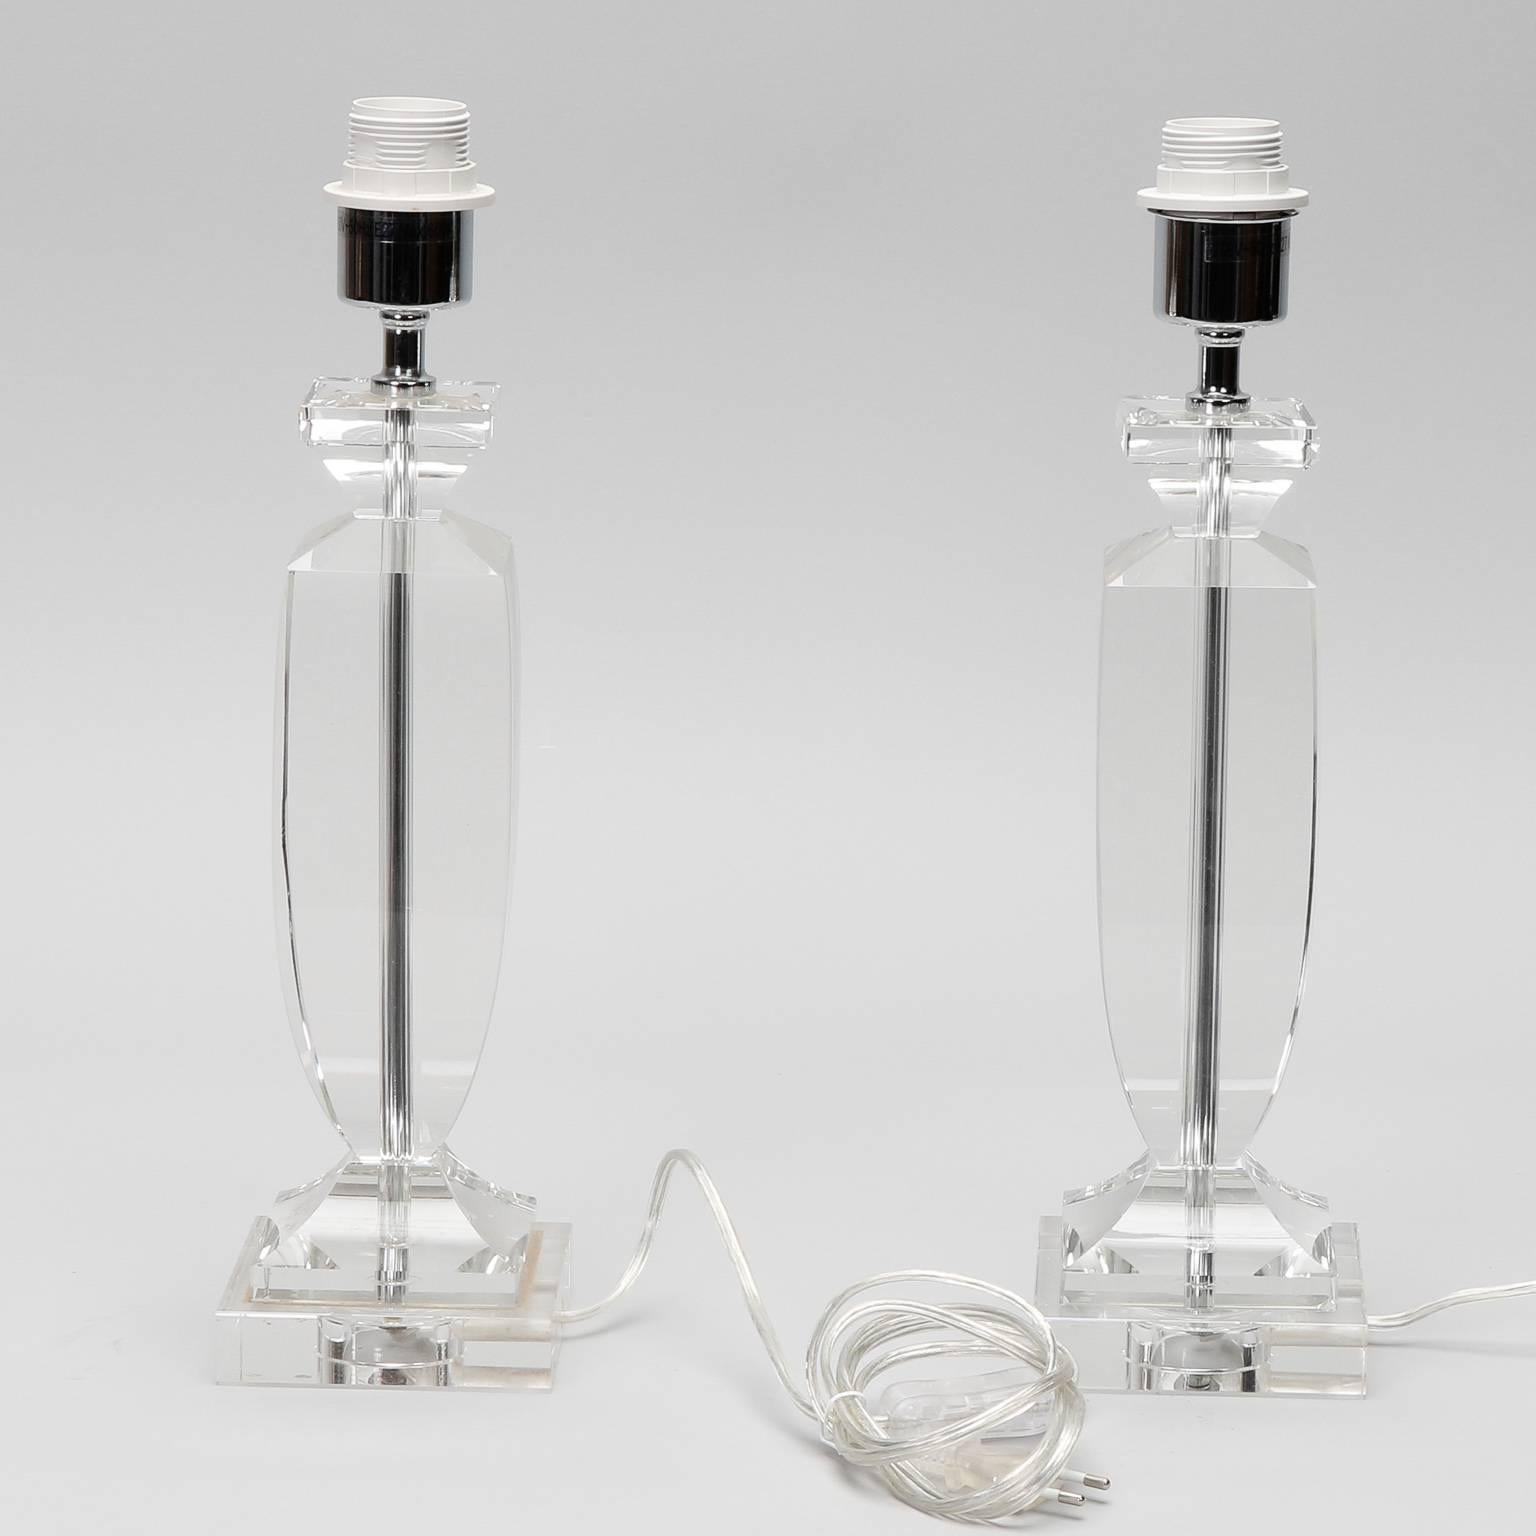 Pair of heavy clear Murano glass table lamps, circa 1990s. Glass is cut and faceted at base, center column and top. New electrical wiring for US standards. No maker’s marks found. Sold and priced as a pair.